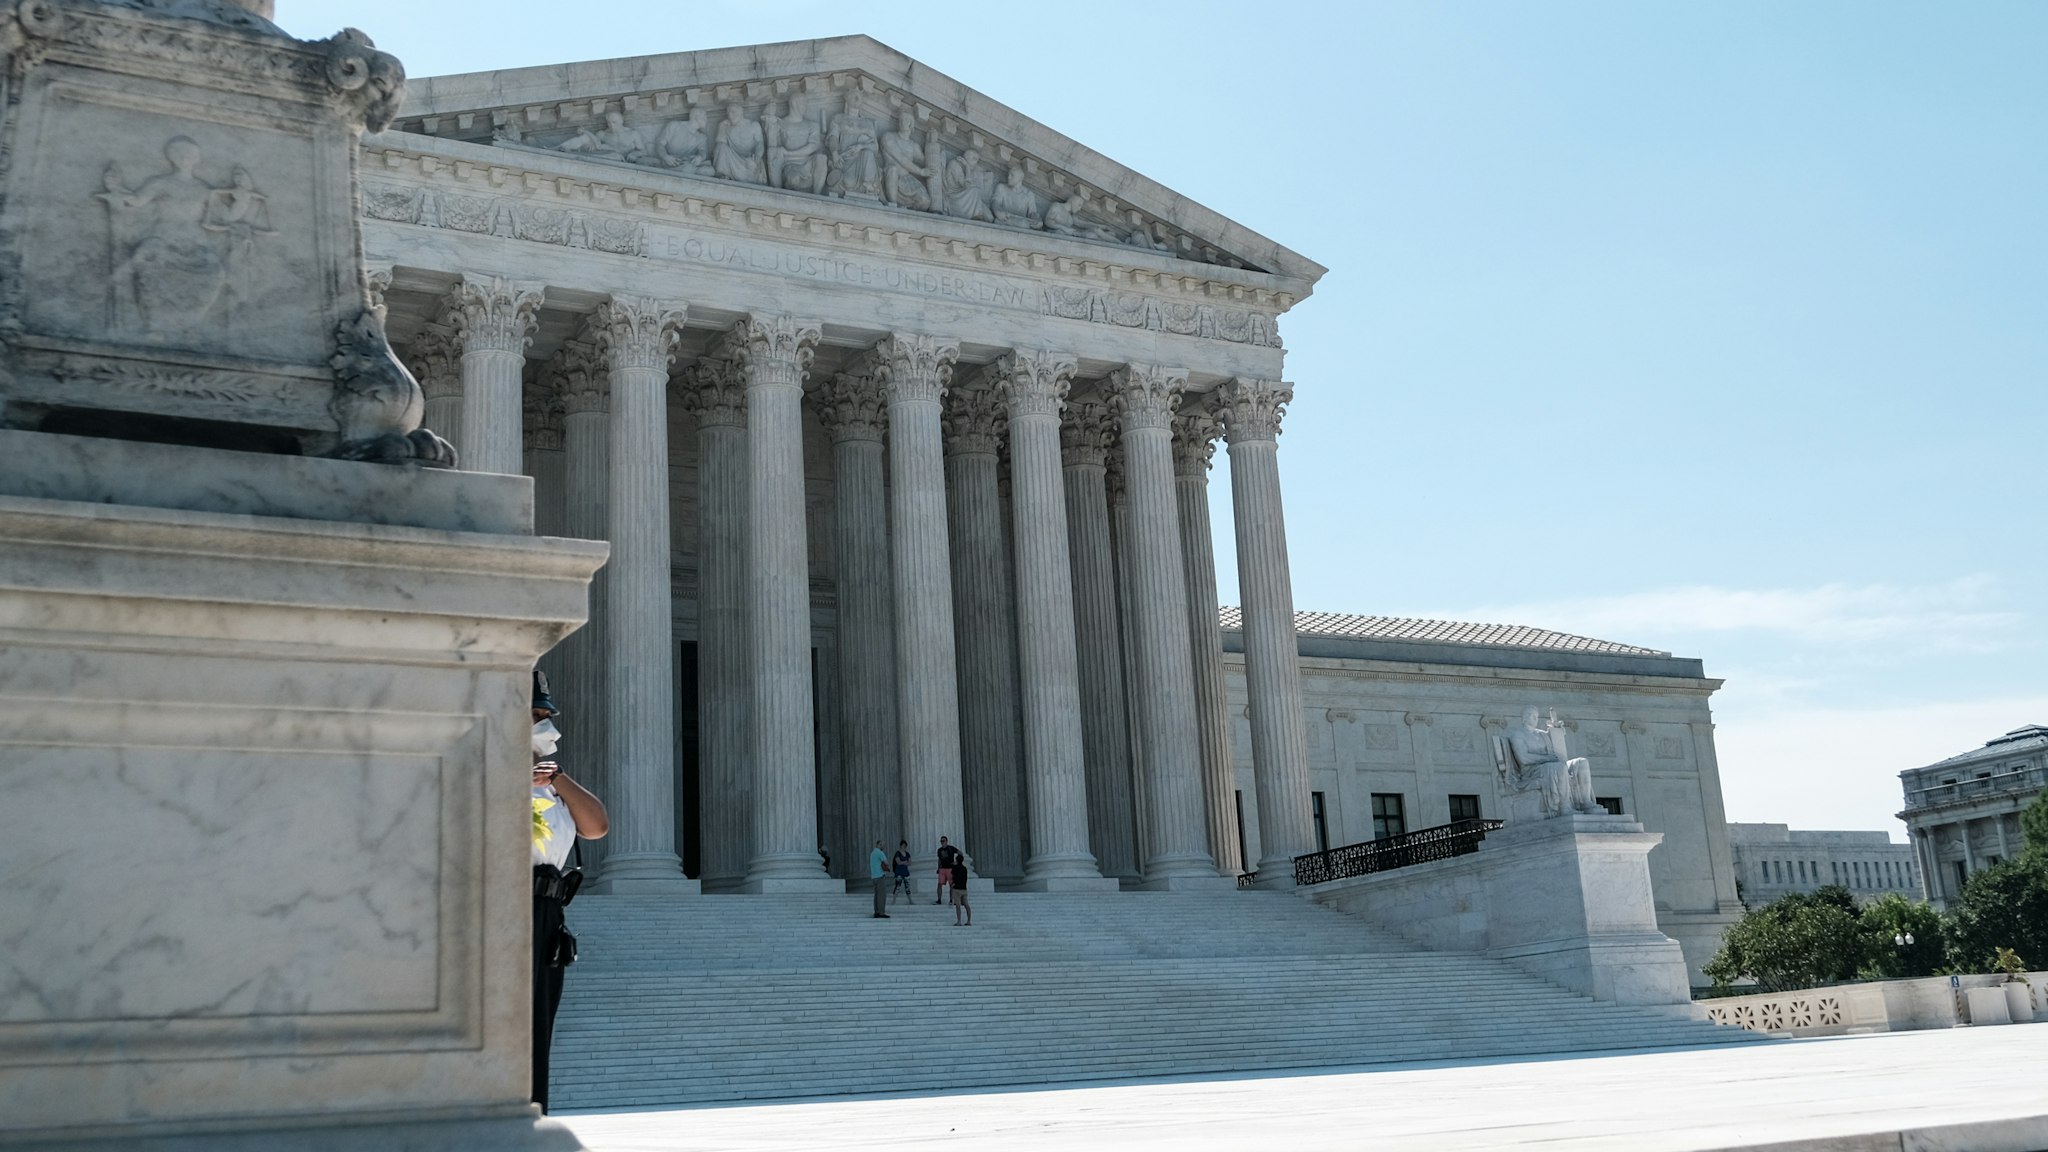 WASHINGTON, DC - JUNE 25: The U.S. Supreme Court building is seen on June 25, 2020 in Washington, DC. The Supreme Court is expected to issue a ruling on abortion rights soon. (Photo by Michael A. McCoy/Getty Images)